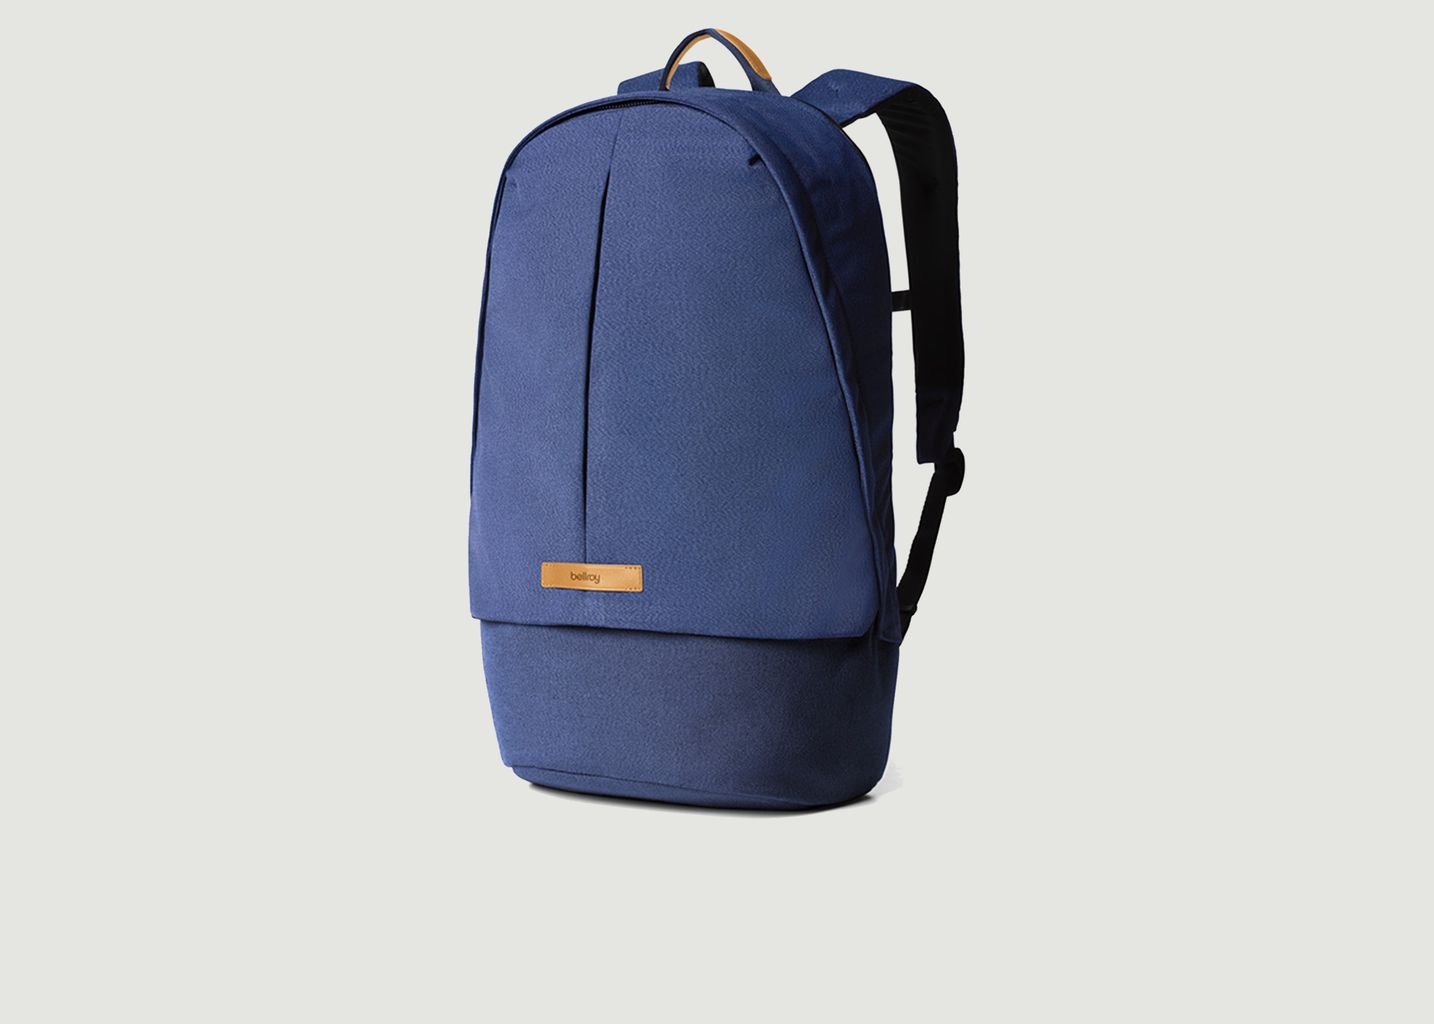 Bellroy Blue Classic Backpack